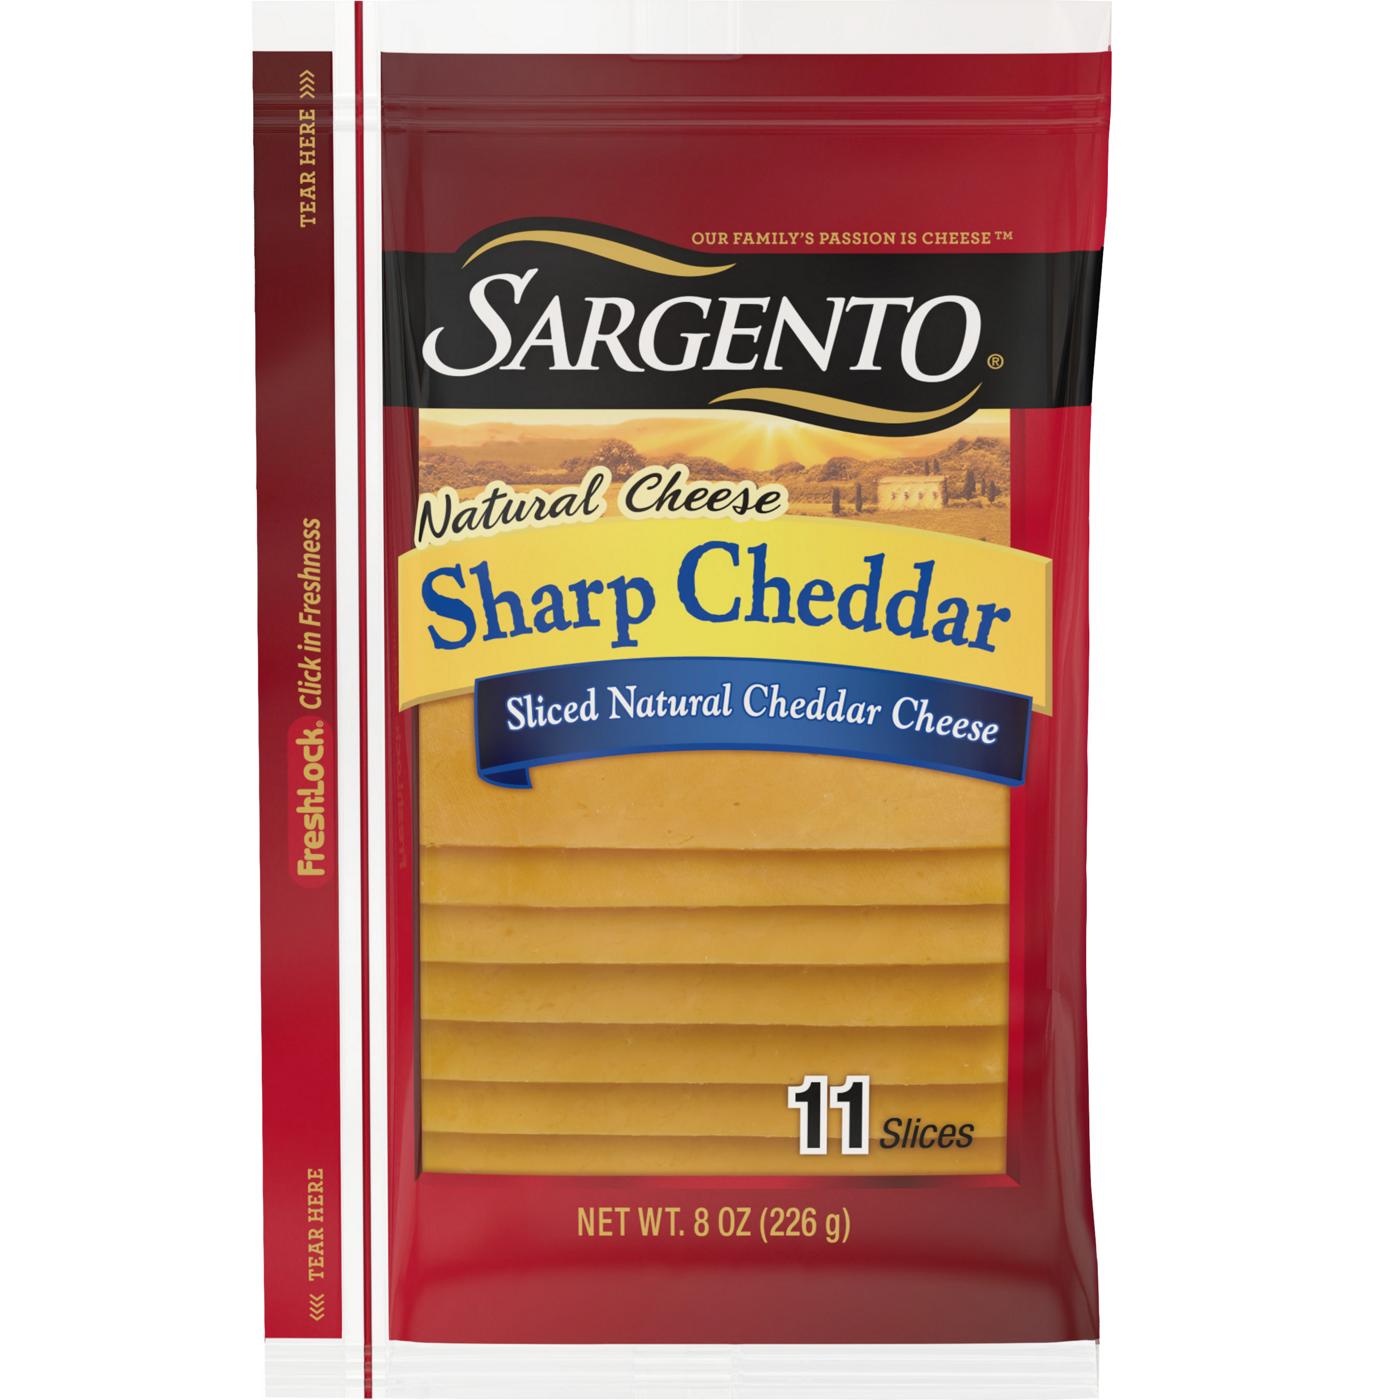 SARGENTO Sharp Cheddar Sliced Cheese; image 1 of 2